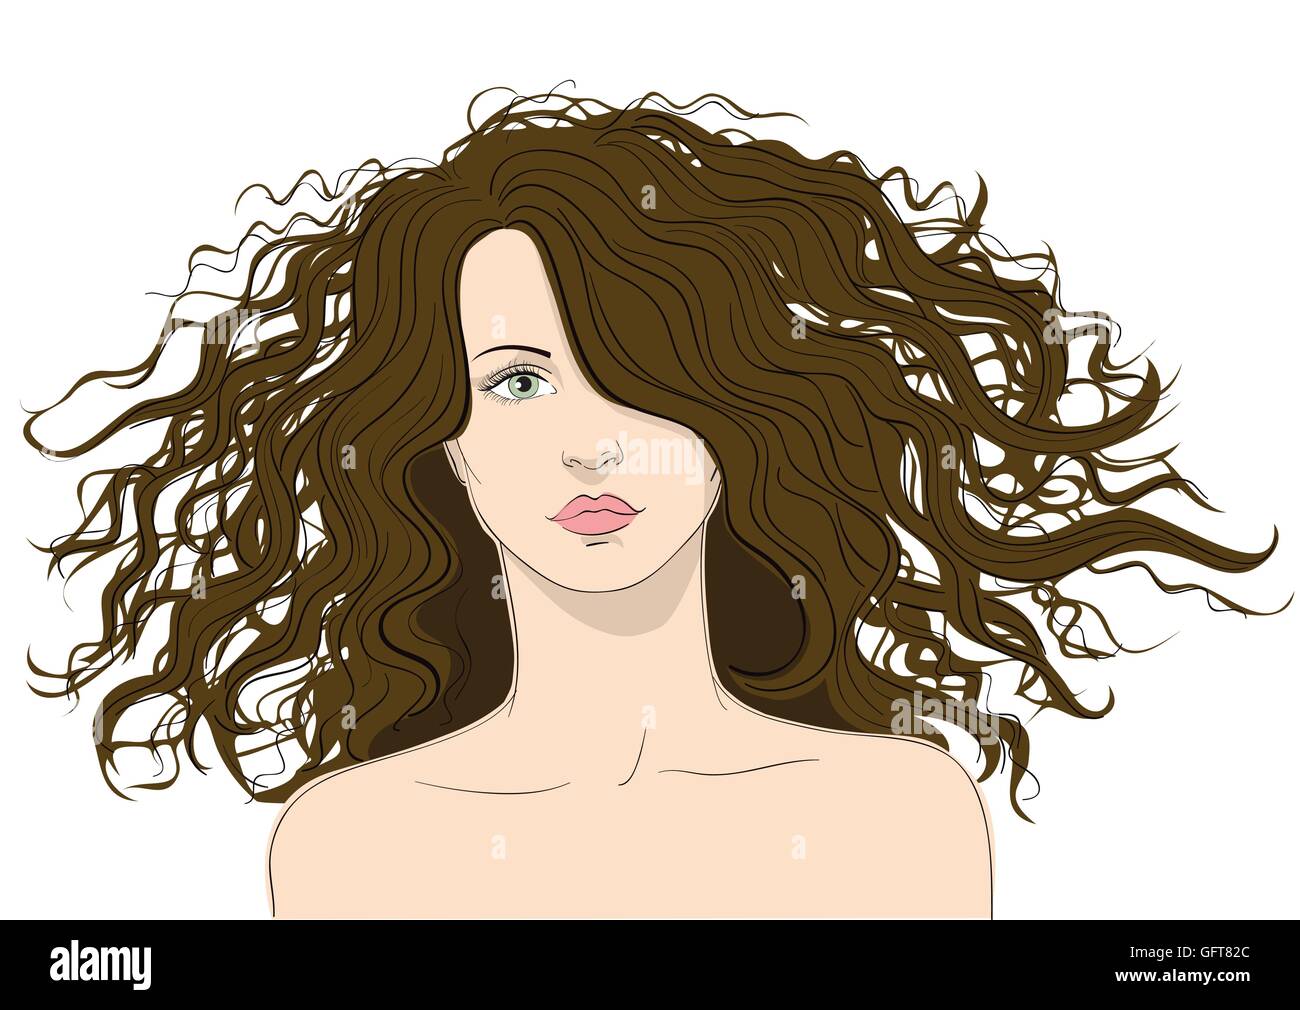 Woman with big hair vector illustration Stock Vector